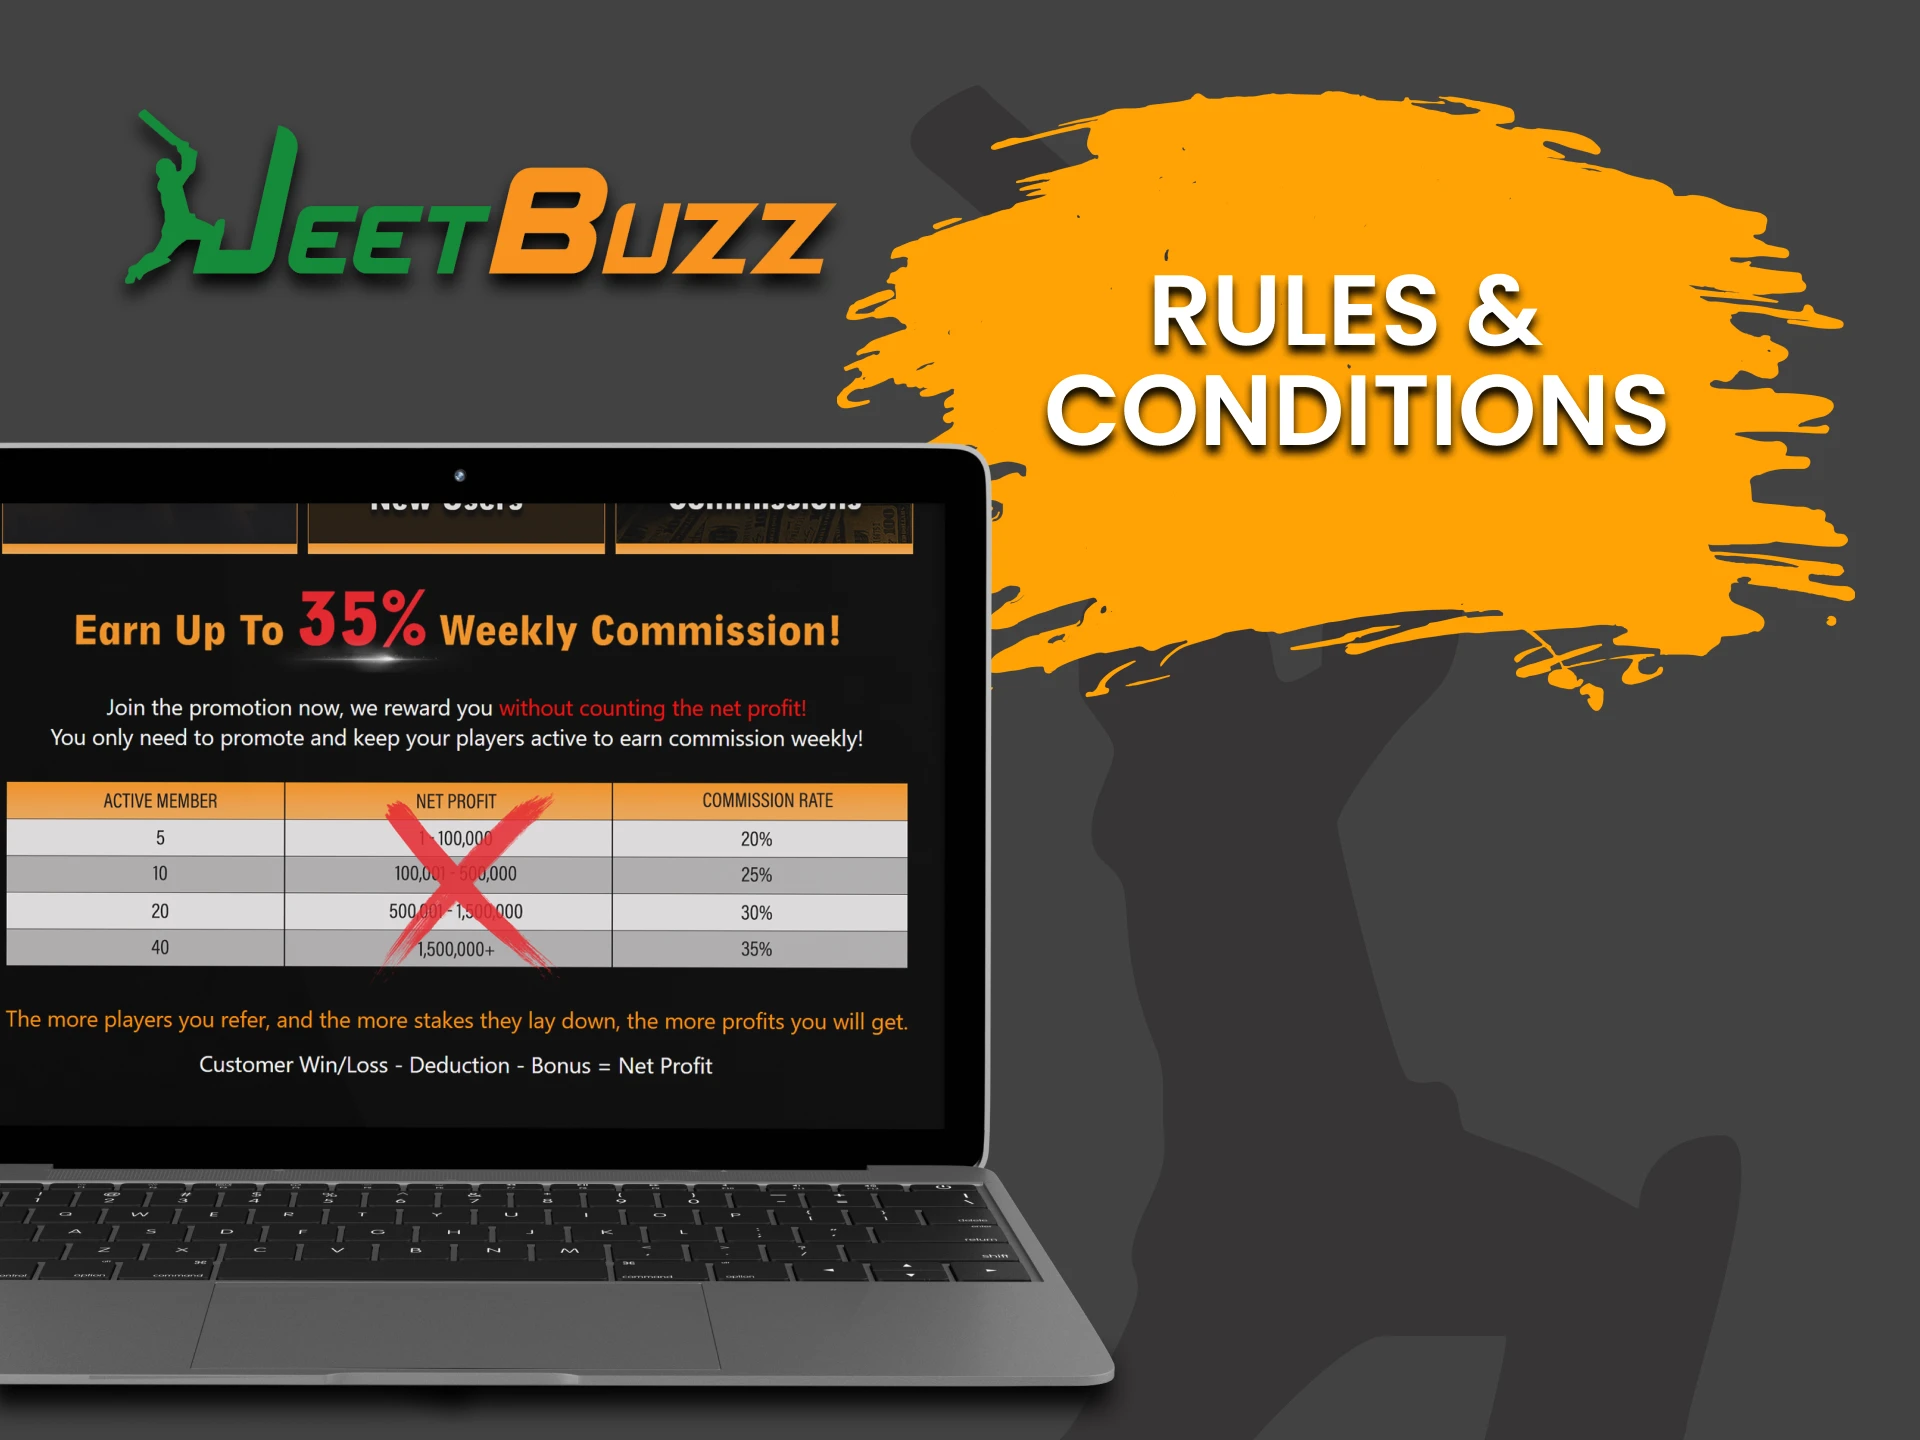 Learn about the terms and conditions of the JeetBuzz affiliate program.